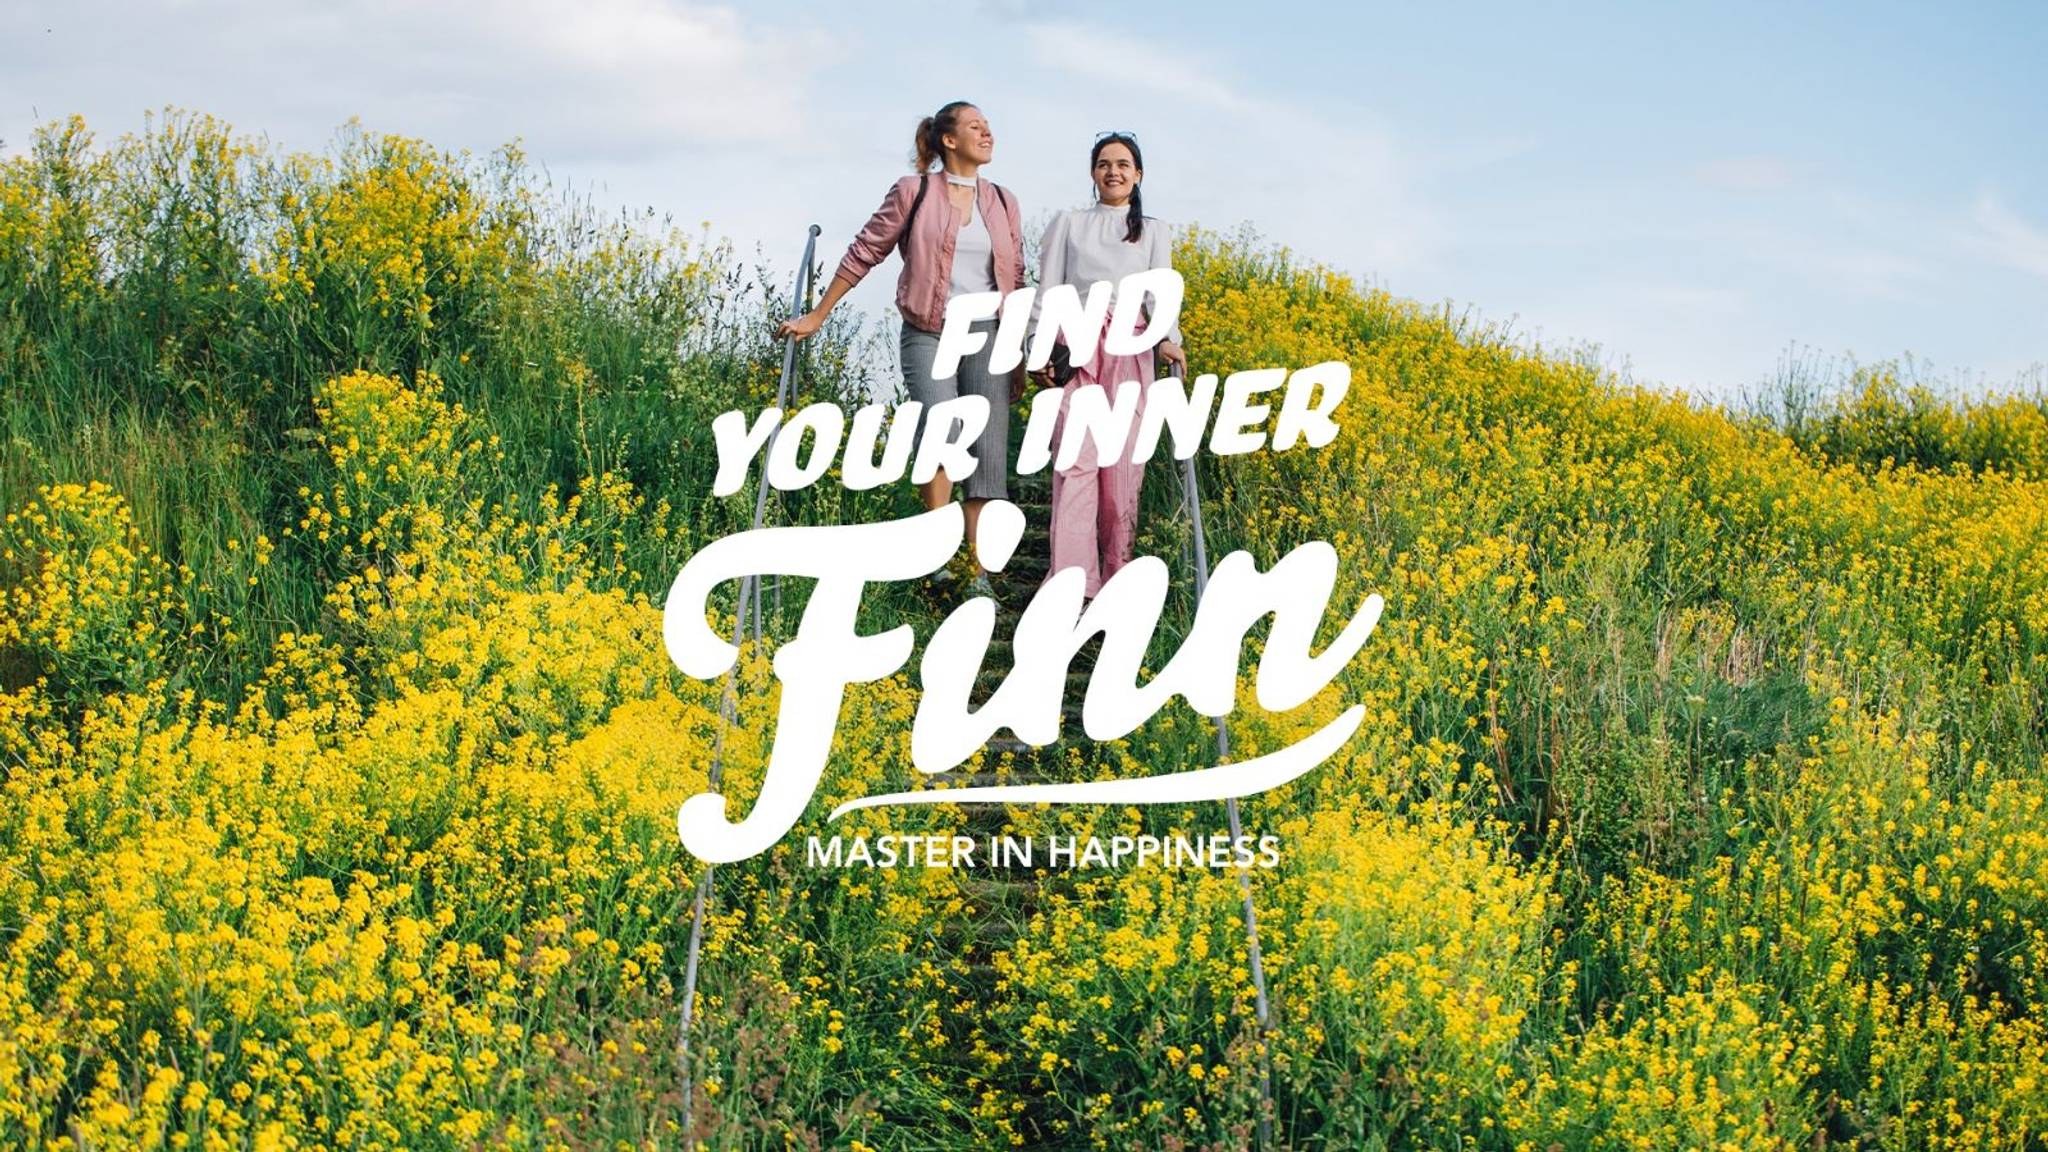 Visit Finland launches a happiness masterclass in nature